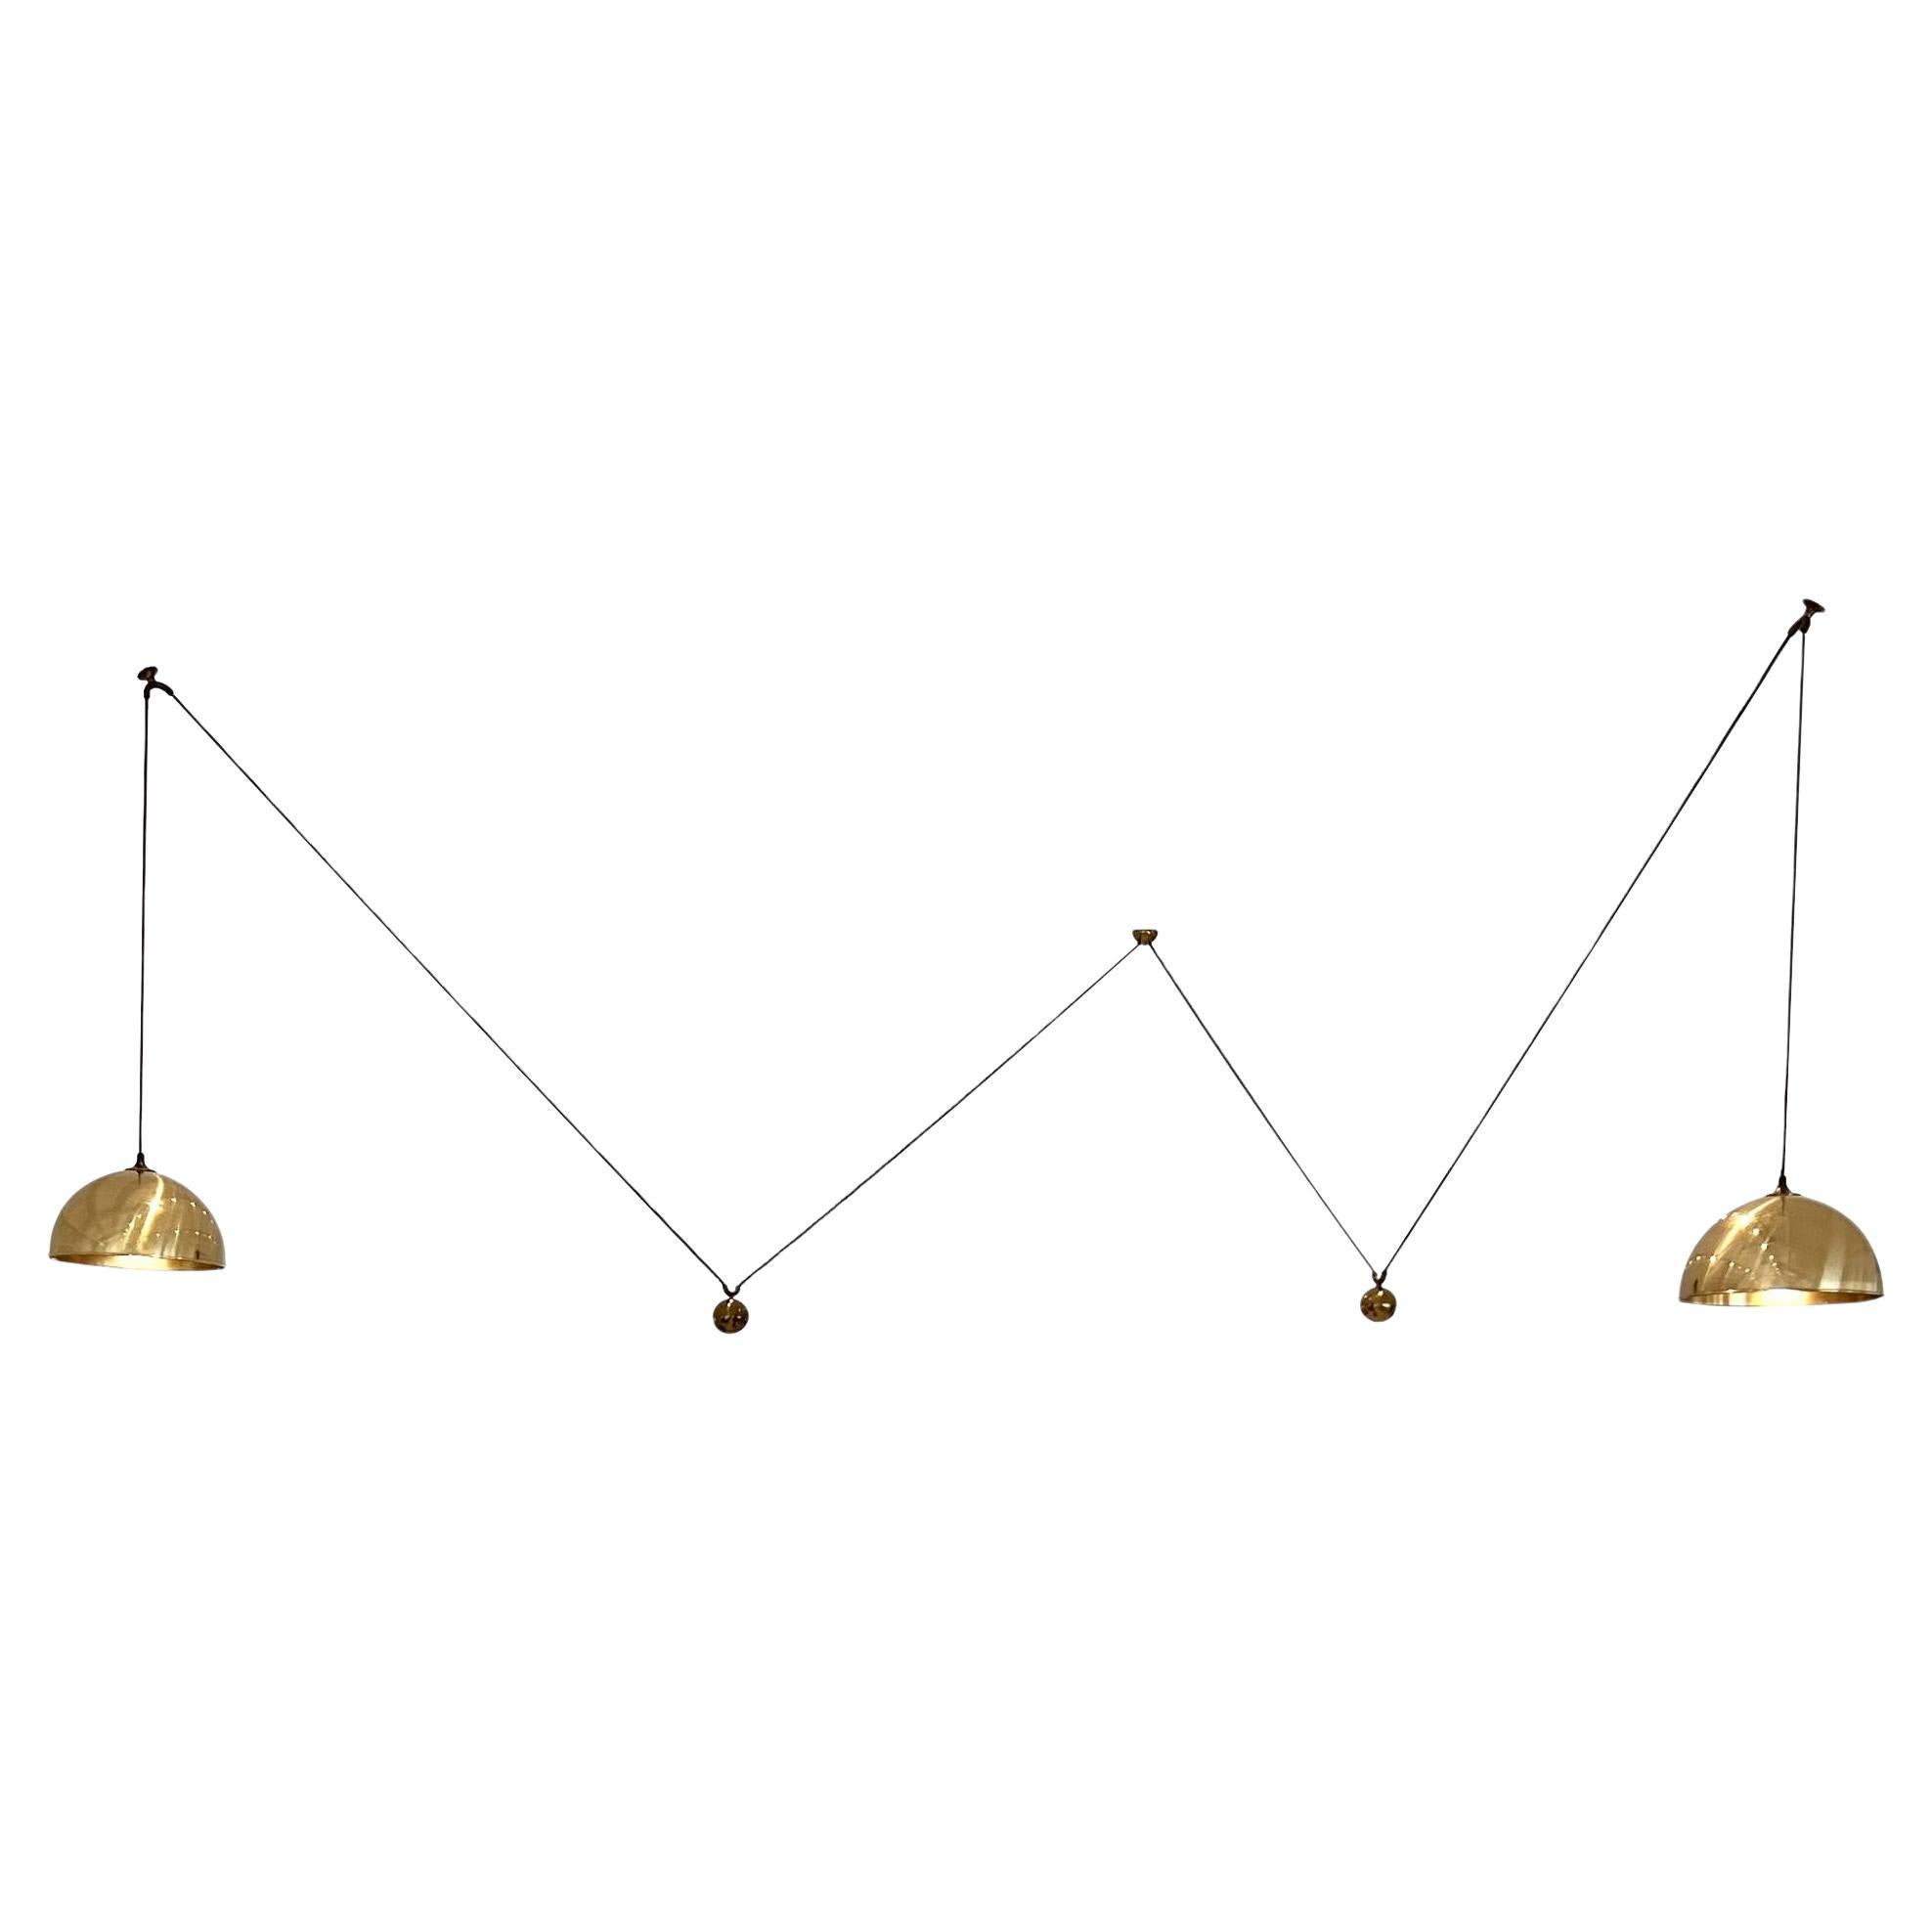 Florian Schulz Brass Double Counter Balance Adjustable Chandelier, 1980s Germany For Sale